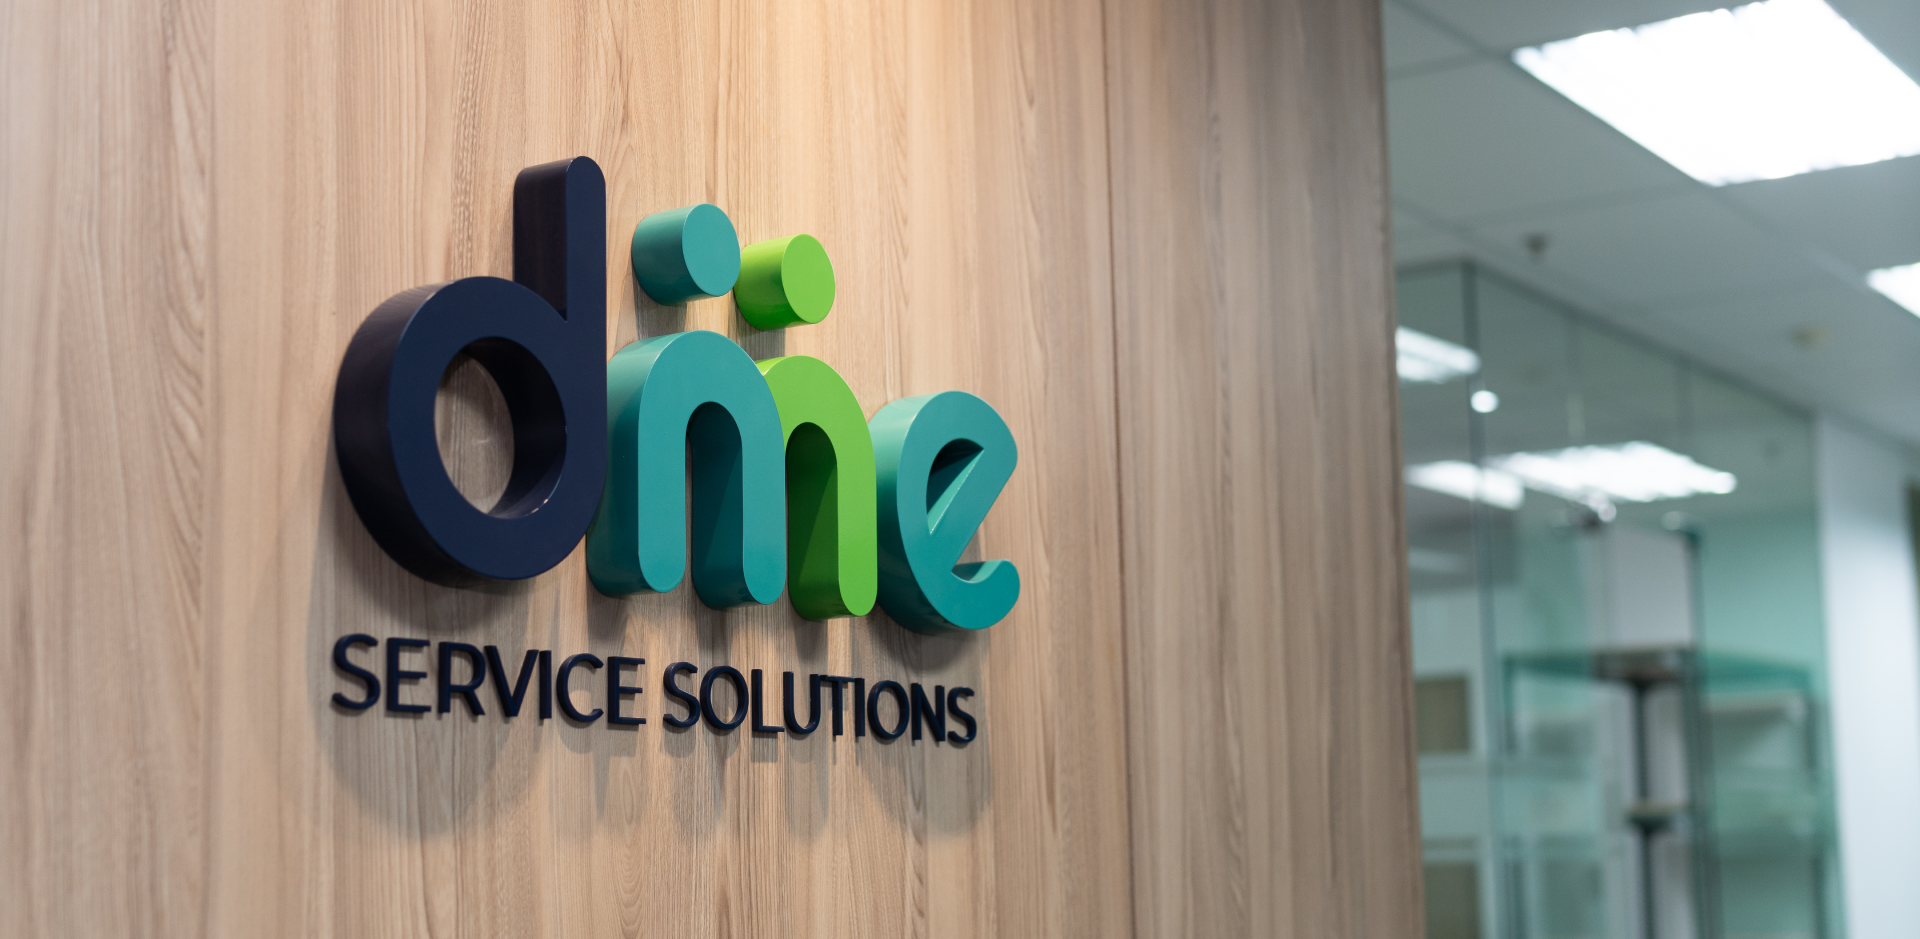 DME Service Solutions Office